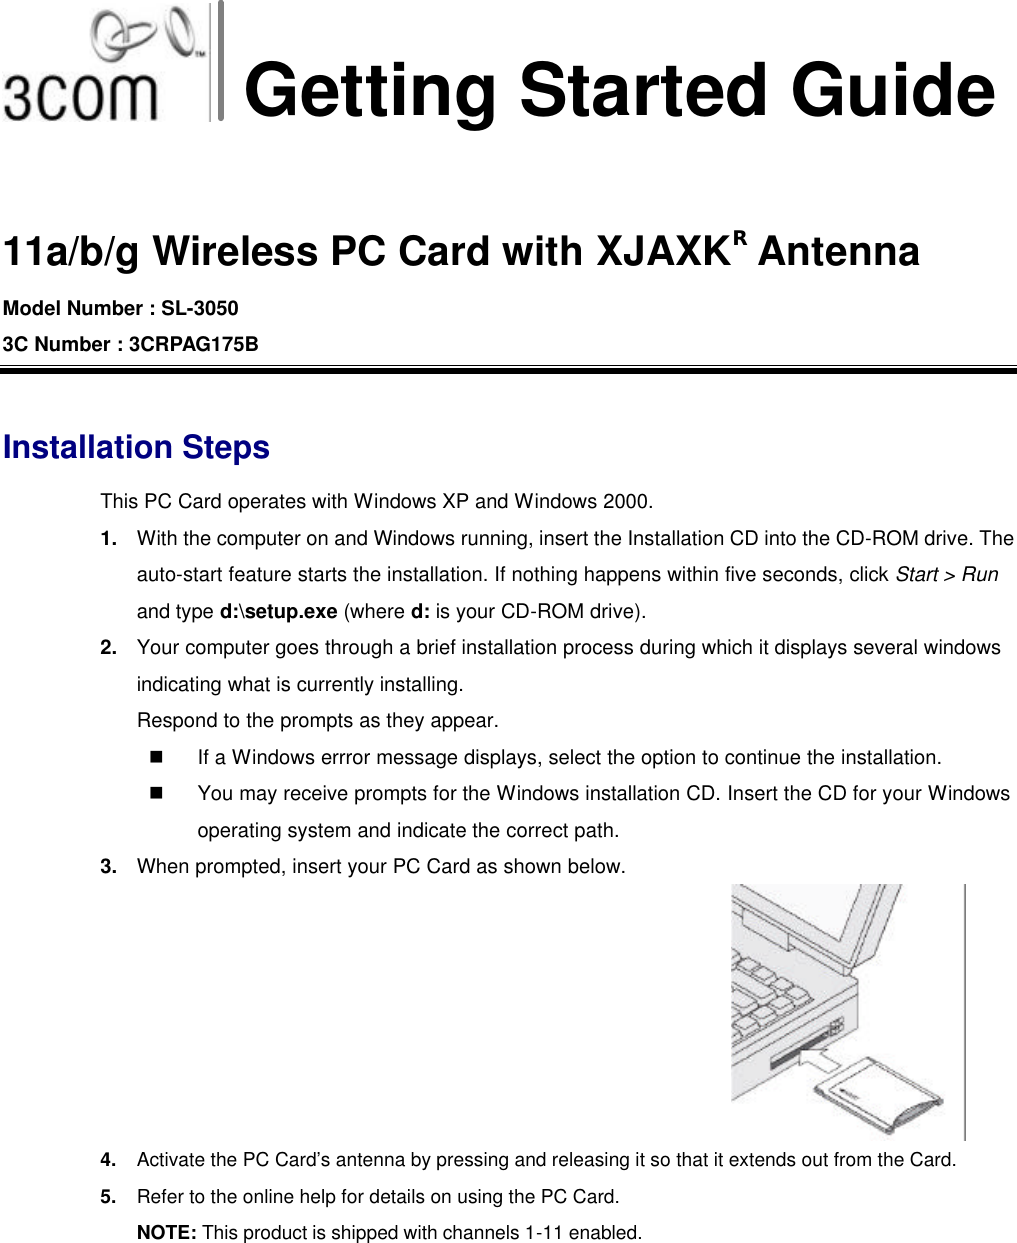 Getting Started Guide  11a/b/g Wireless PC Card with XJAXKR Antenna Model Number : SL-3050 3C Number : 3CRPAG175B  Installation Steps This PC Card operates with Windows XP and Windows 2000. 1. With the computer on and Windows running, insert the Installation CD into the CD-ROM drive. The auto-start feature starts the installation. If nothing happens within five seconds, click Start &gt; Run and type d:\setup.exe (where d: is your CD-ROM drive). 2. Your computer goes through a brief installation process during which it displays several windows indicating what is currently installing.   Respond to the prompts as they appear. n If a Windows errror message displays, select the option to continue the installation. n You may receive prompts for the Windows installation CD. Insert the CD for your Windows operating system and indicate the correct path. 3. When prompted, insert your PC Card as shown below. 4. Activate the PC Card’s antenna by pressing and releasing it so that it extends out from the Card. 5. Refer to the online help for details on using the PC Card. NOTE: This product is shipped with channels 1 -11 enabled.  